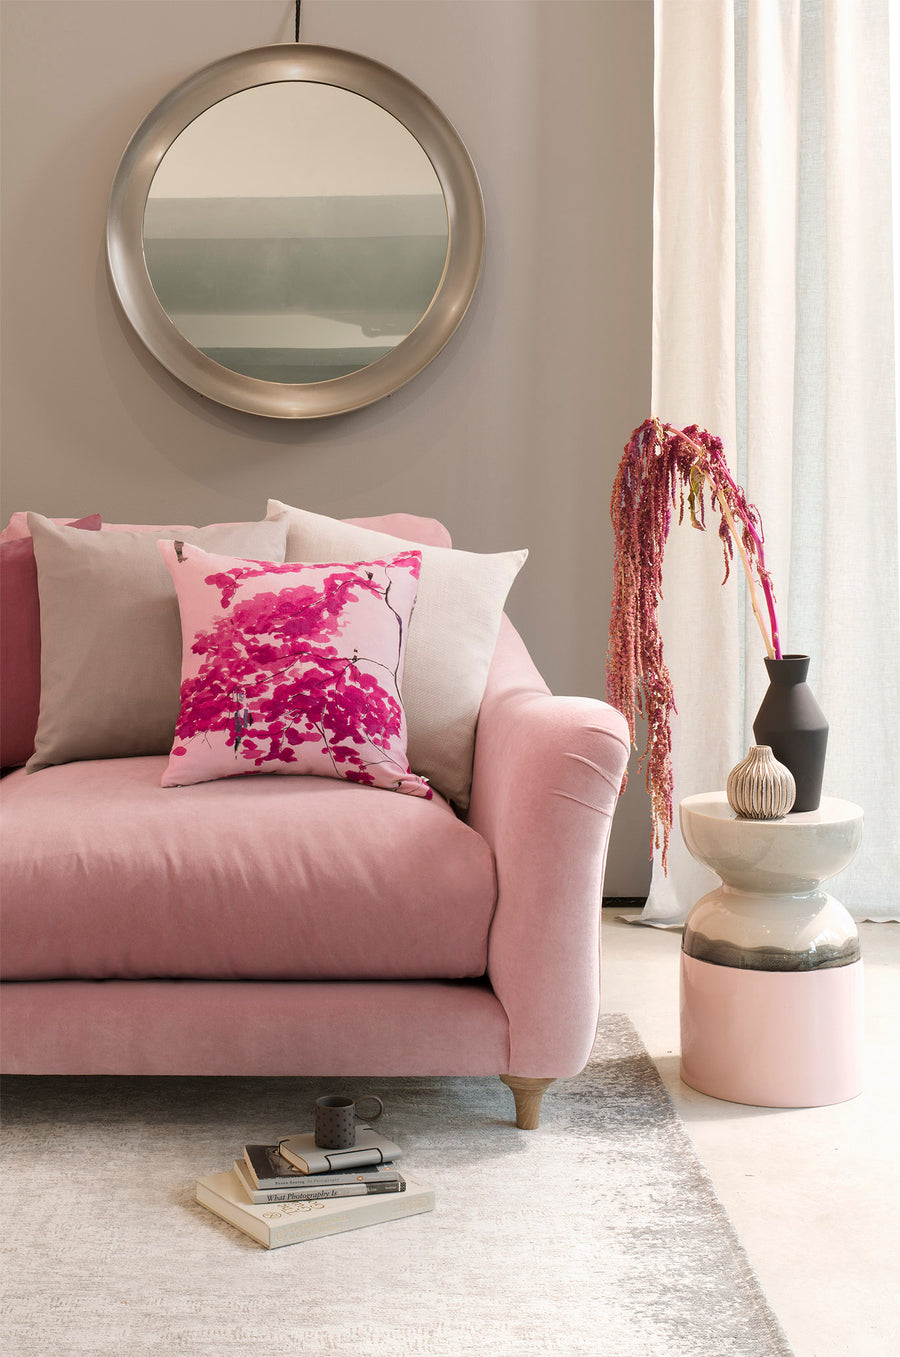 Violet bolster cushion - Chinese Tree in Pink and Violet bolster by Anna Jacobs